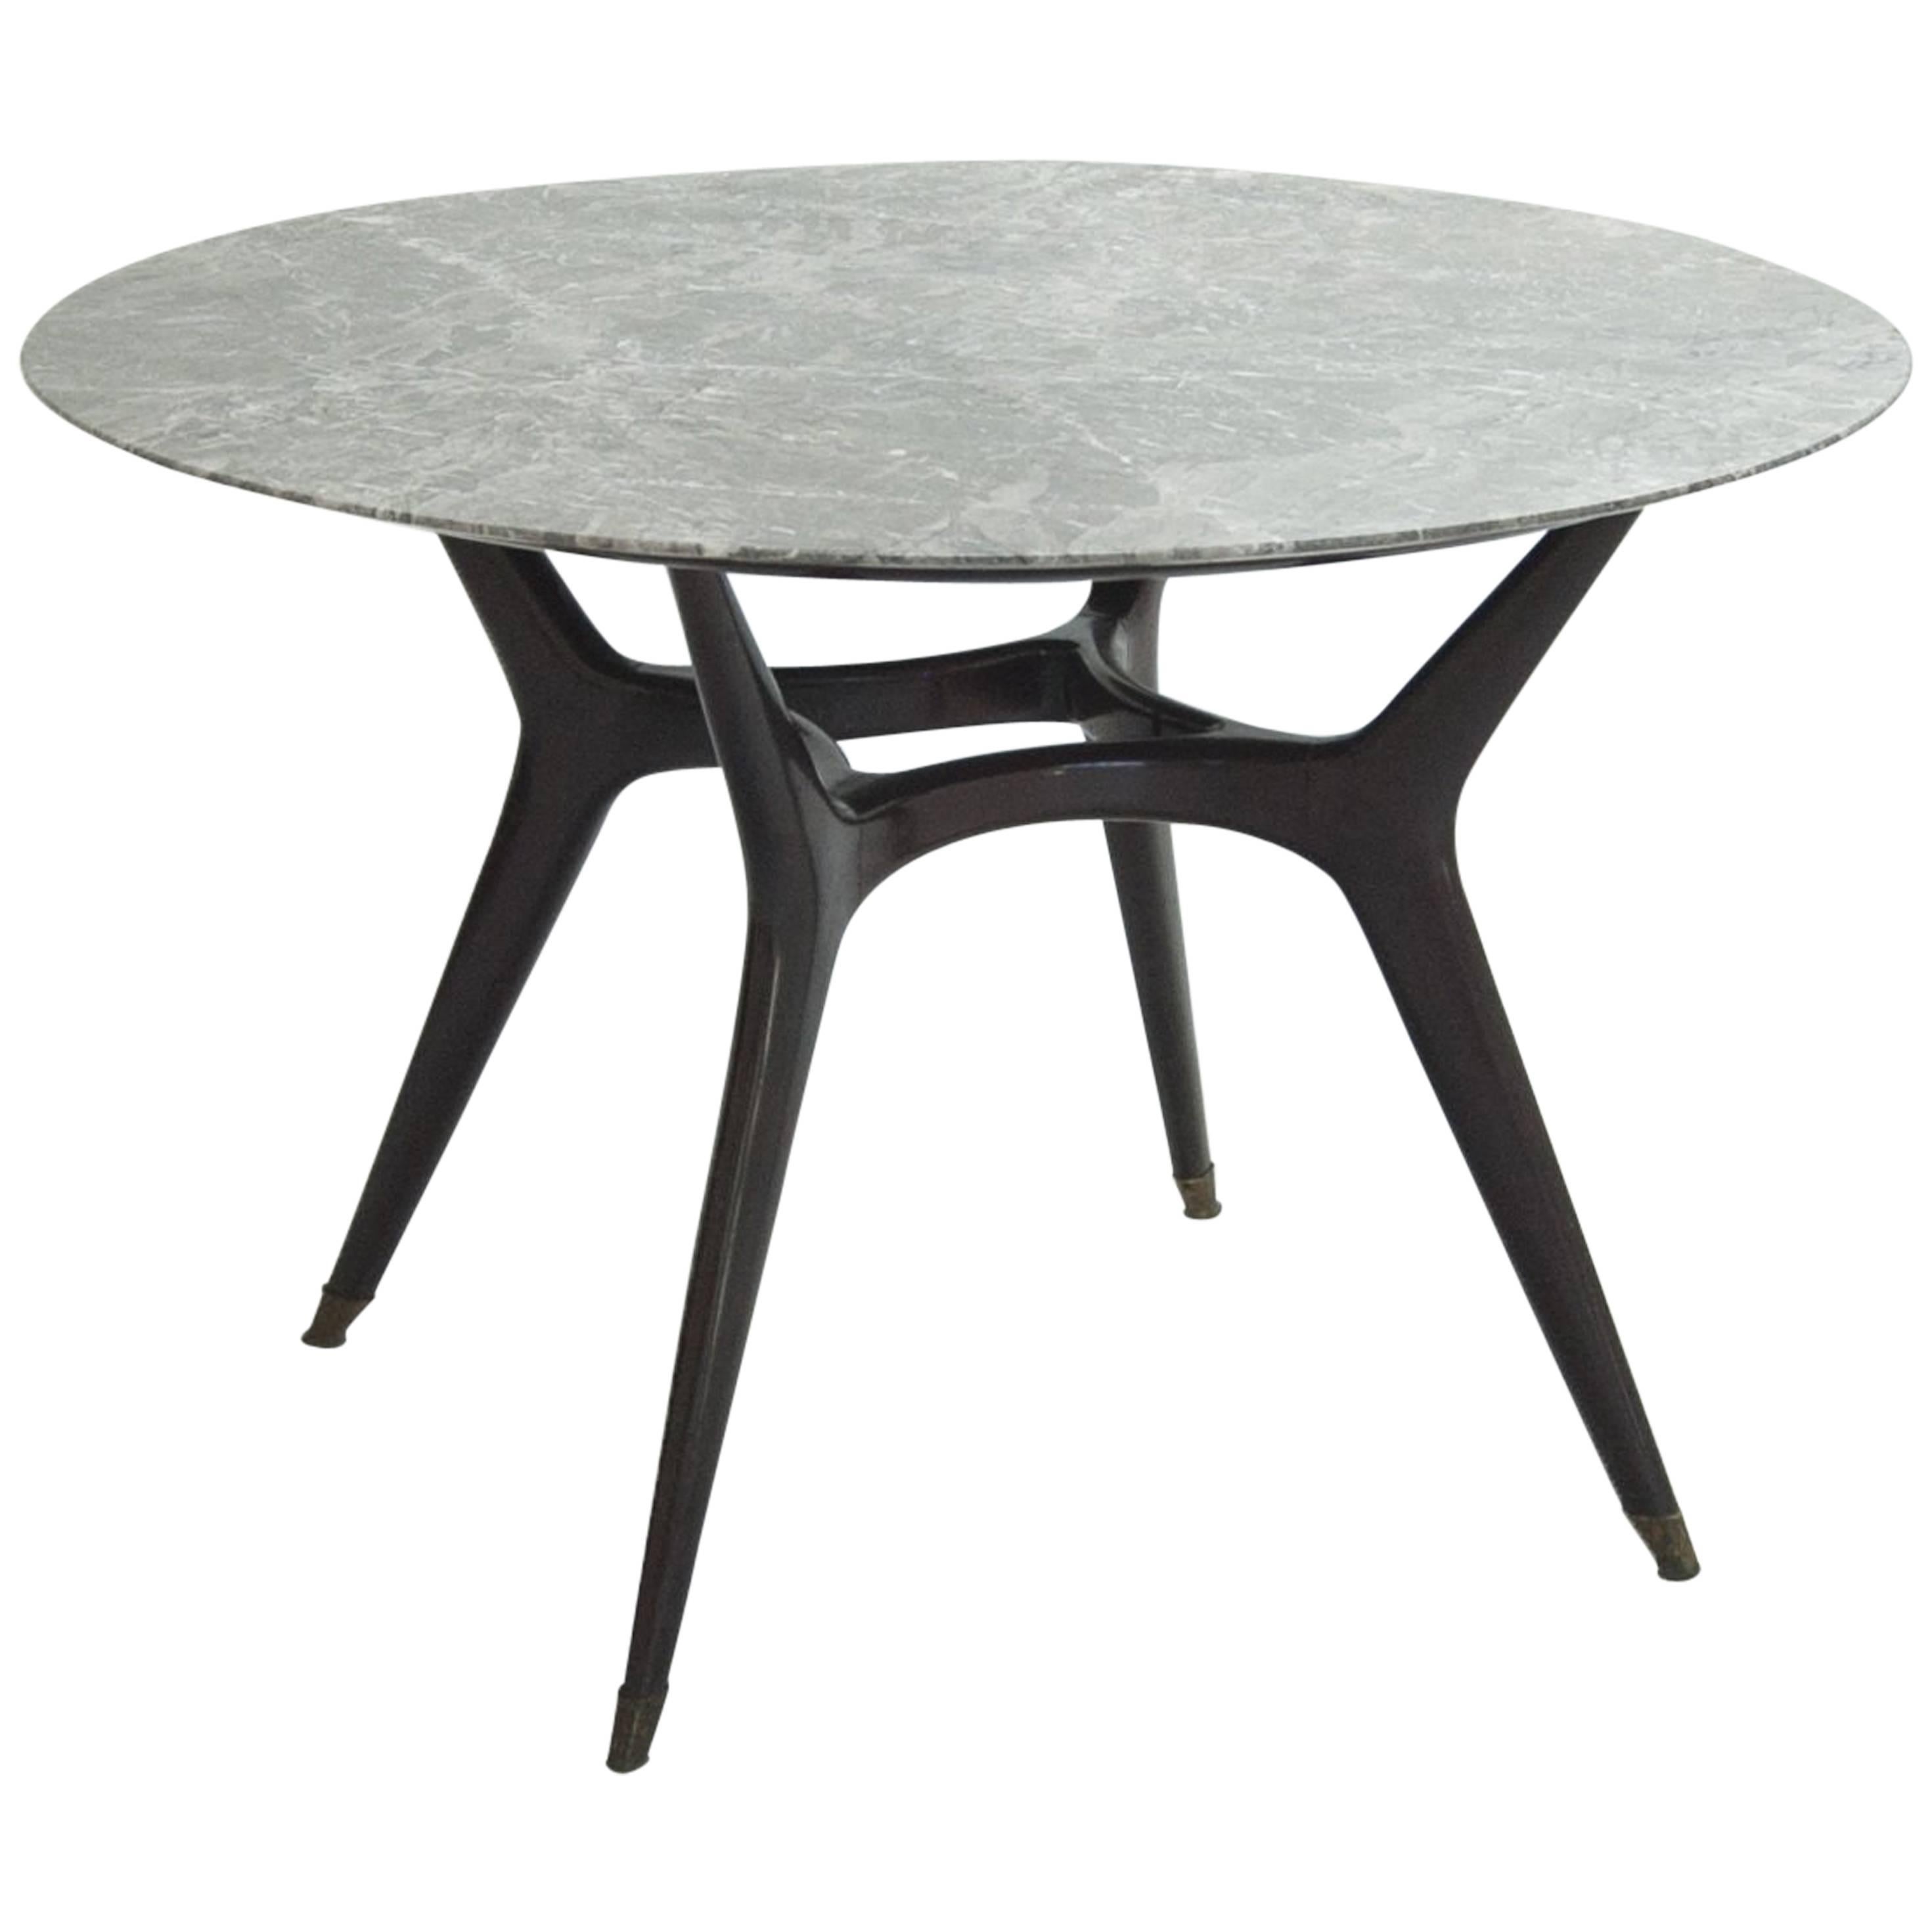 20th Century Italian Marble and wood Circular Dining Table